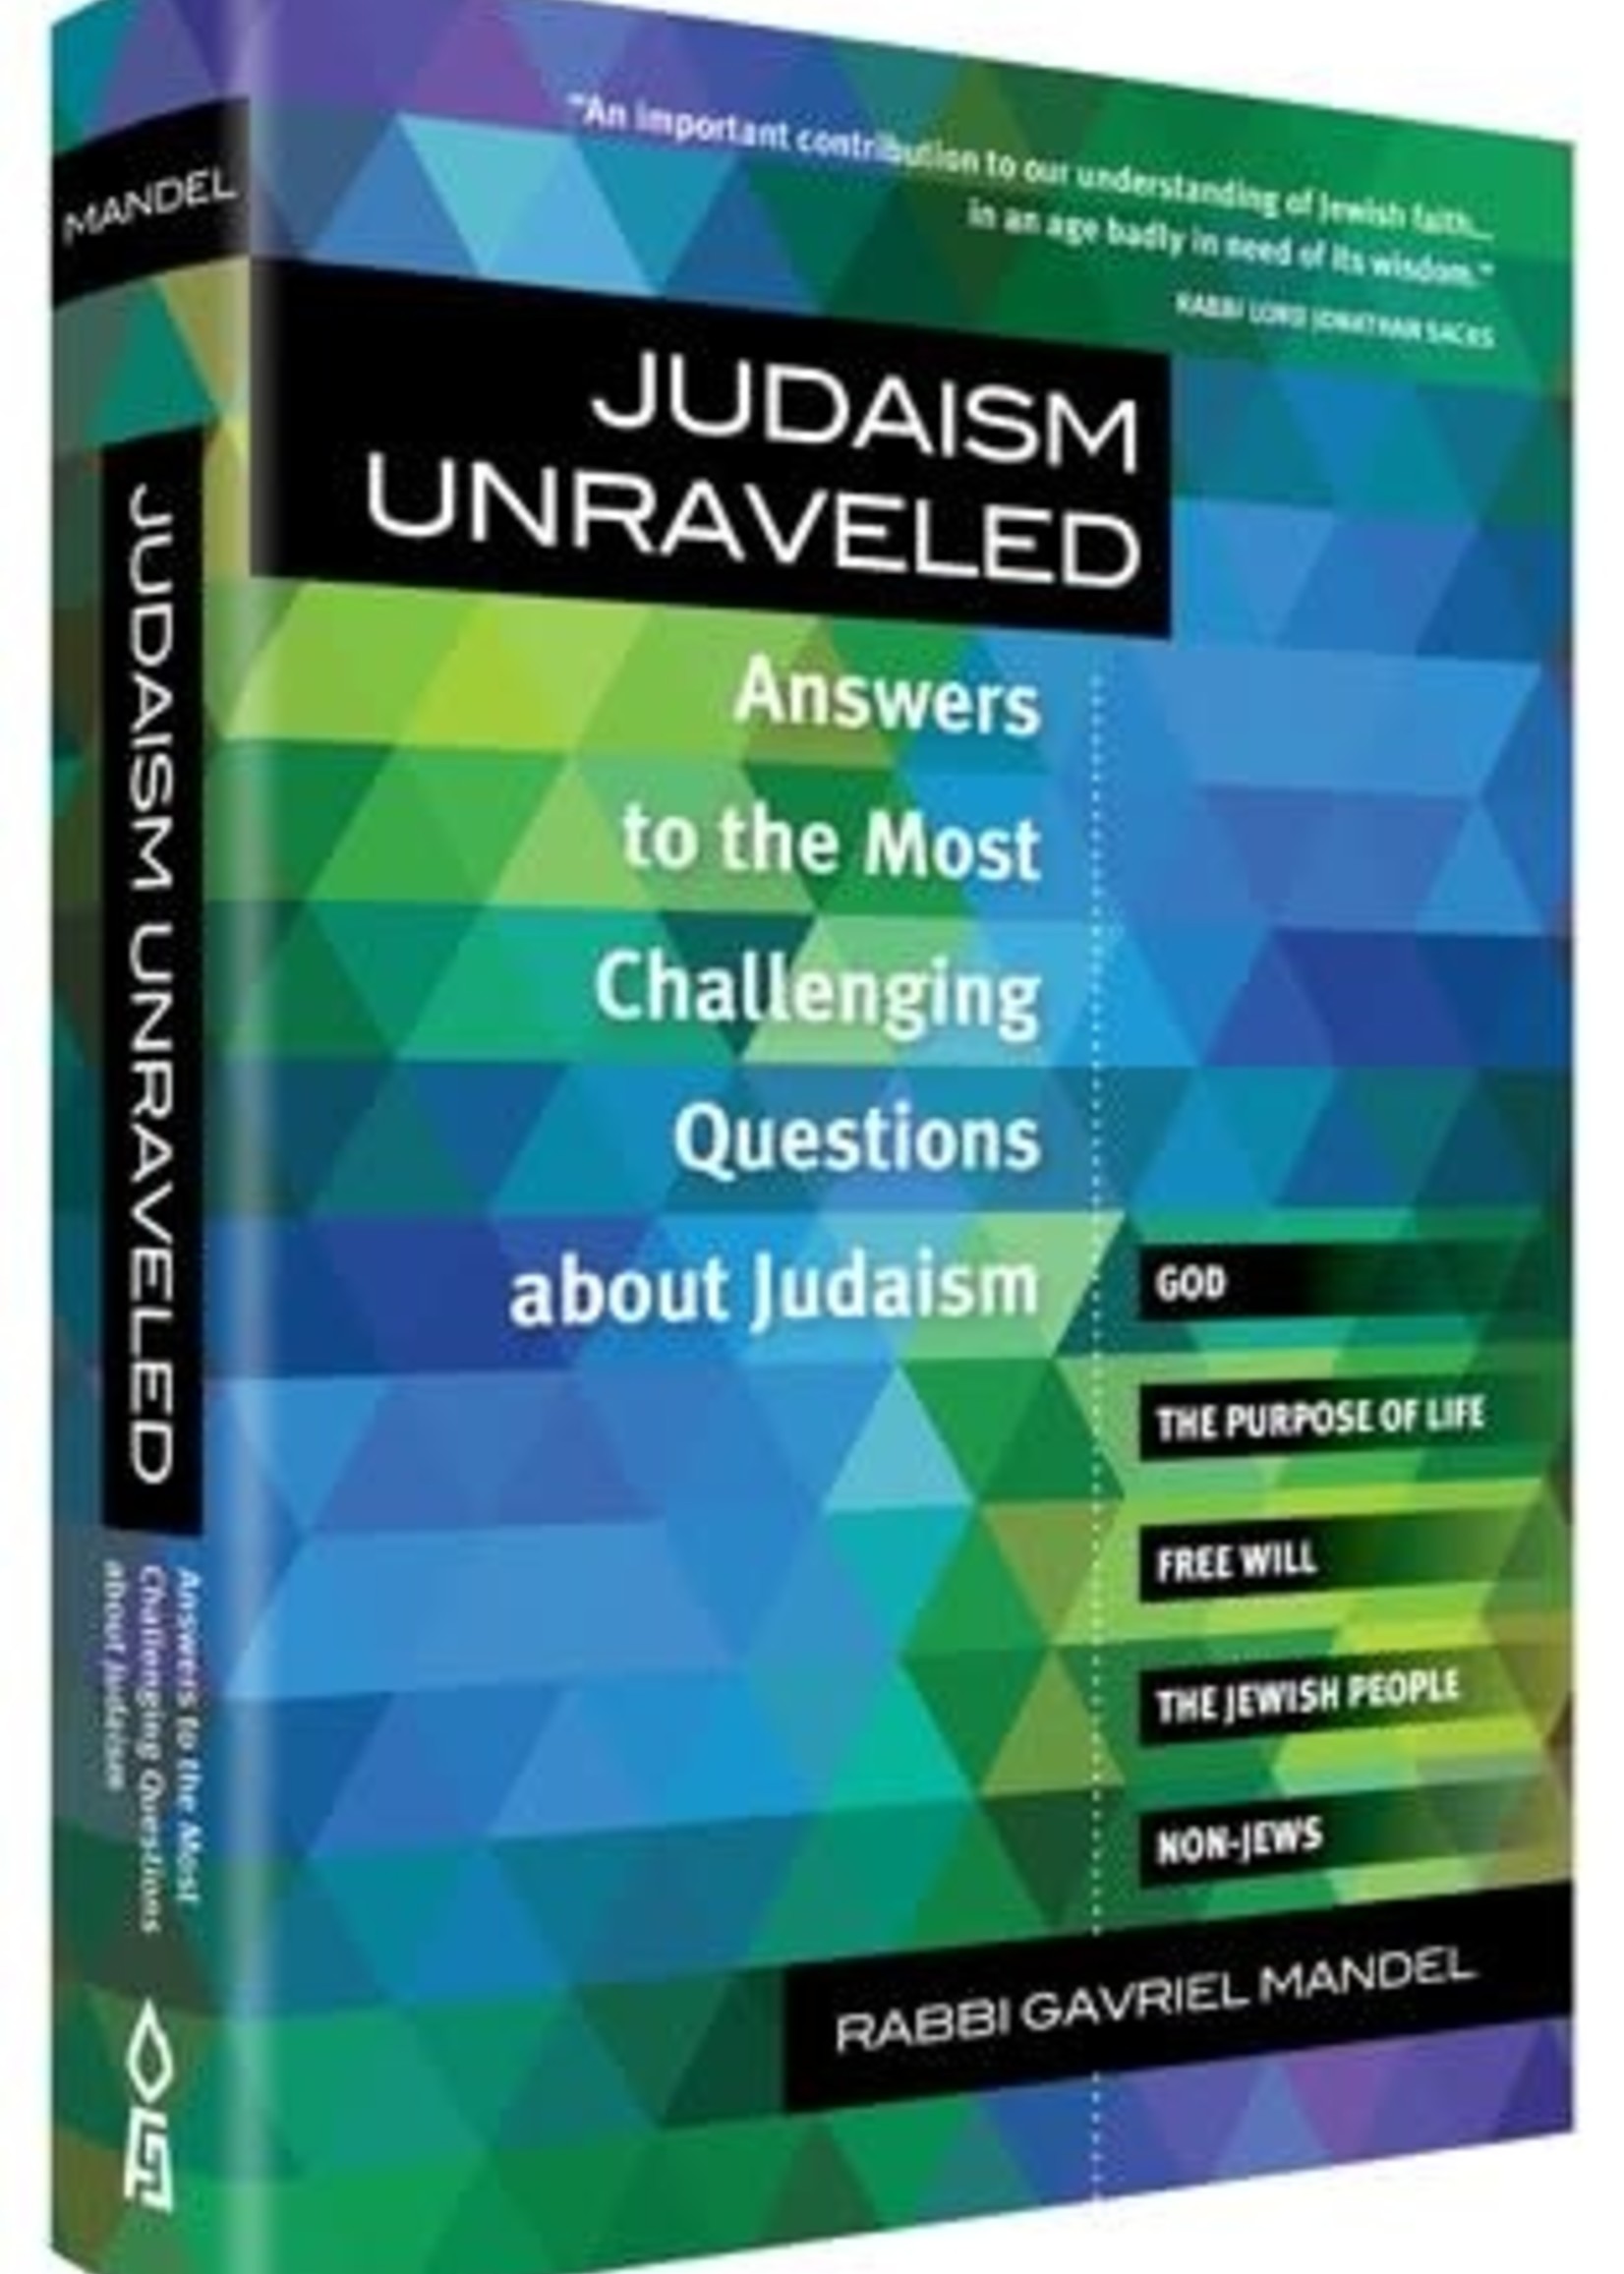 Judaism Unraveled - Answers to the Most Challenging Questions About Judaism